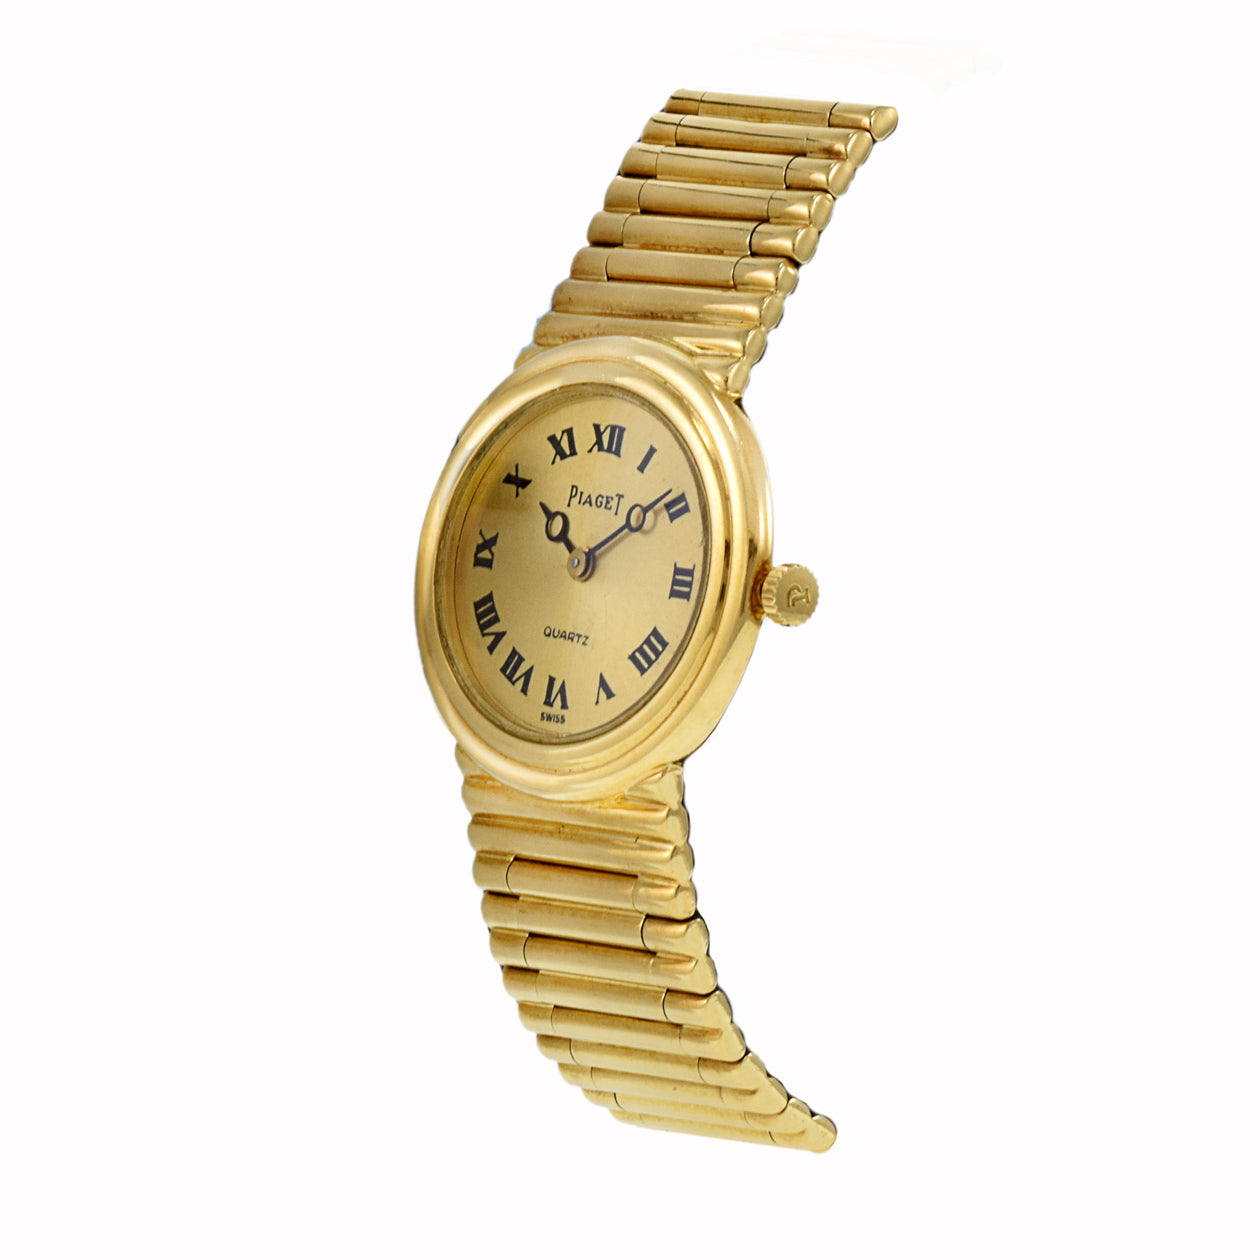 Vintage 1980's Piaget 18Kt Yellow Gold Watch